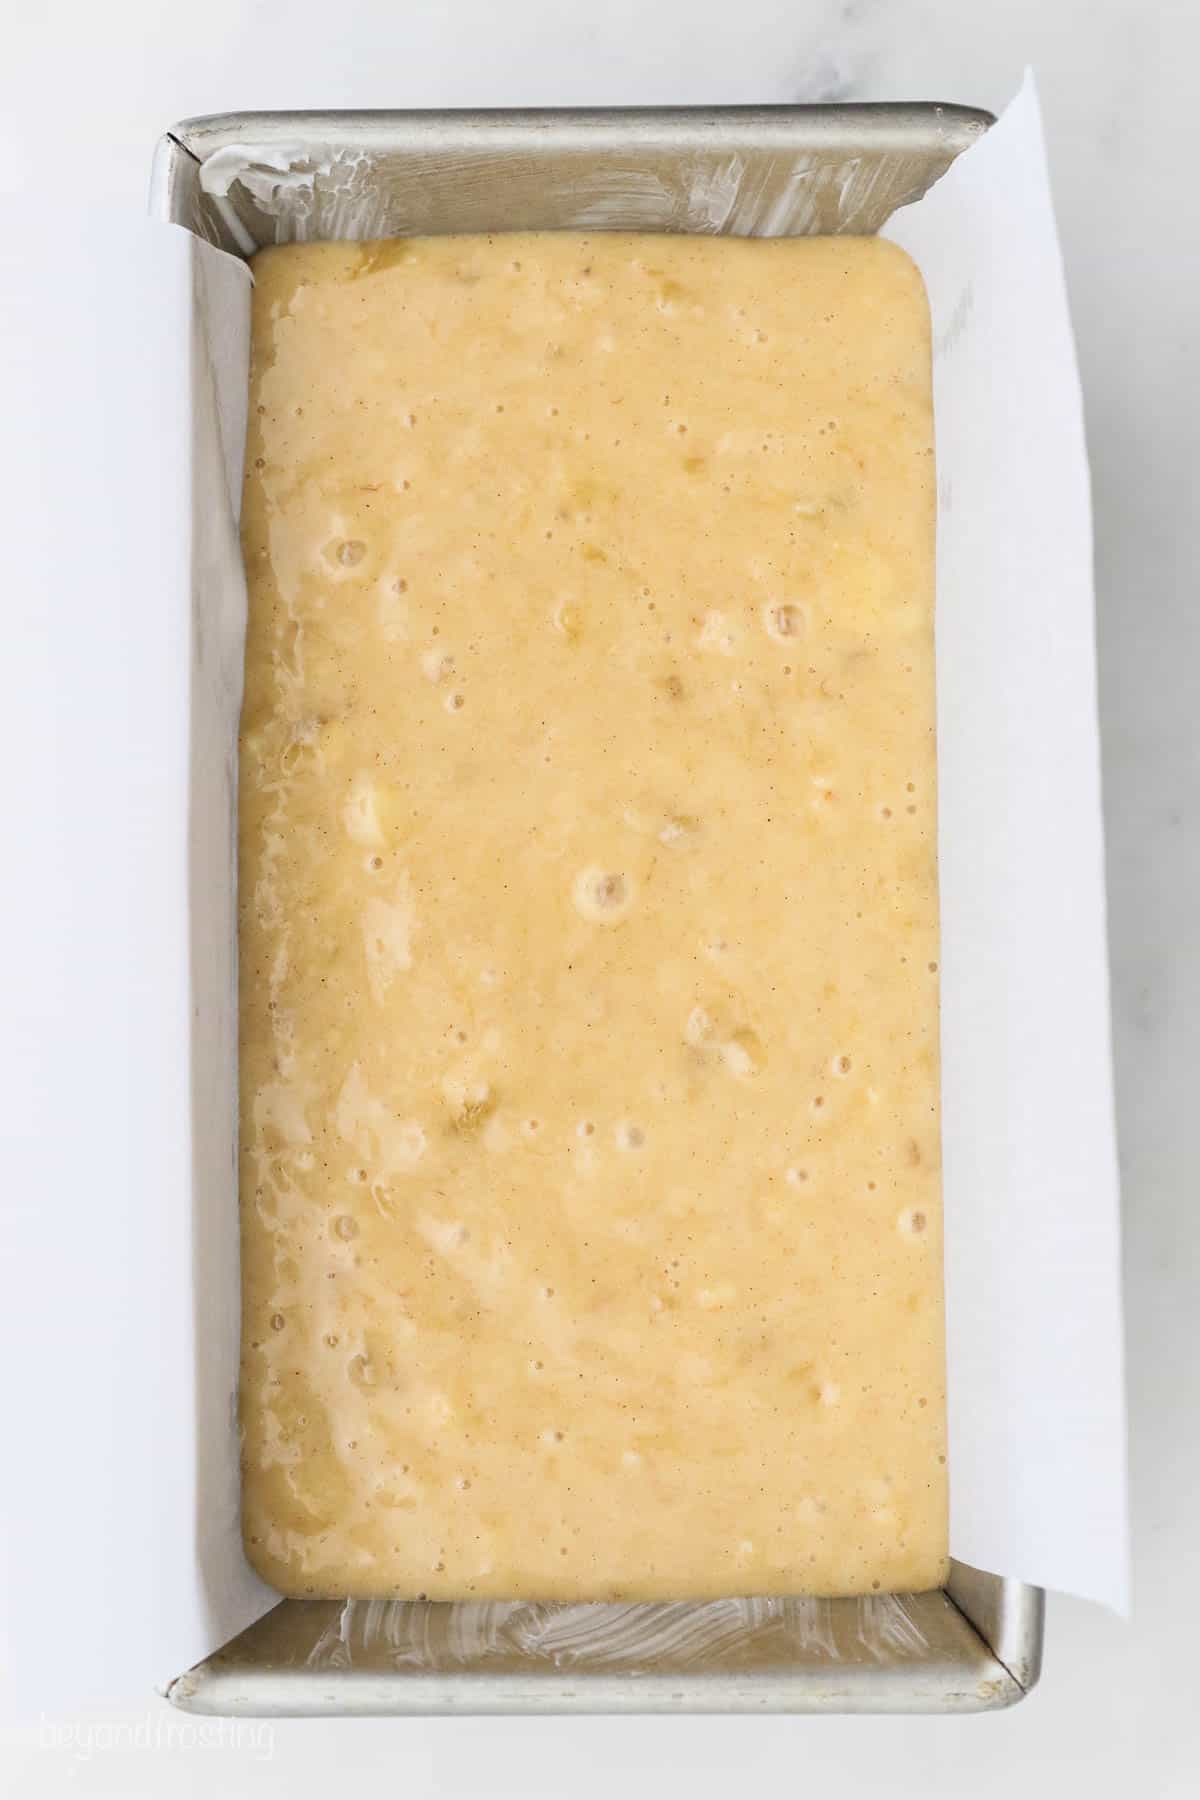 The batter poured into a parchment-lined loaf pan.